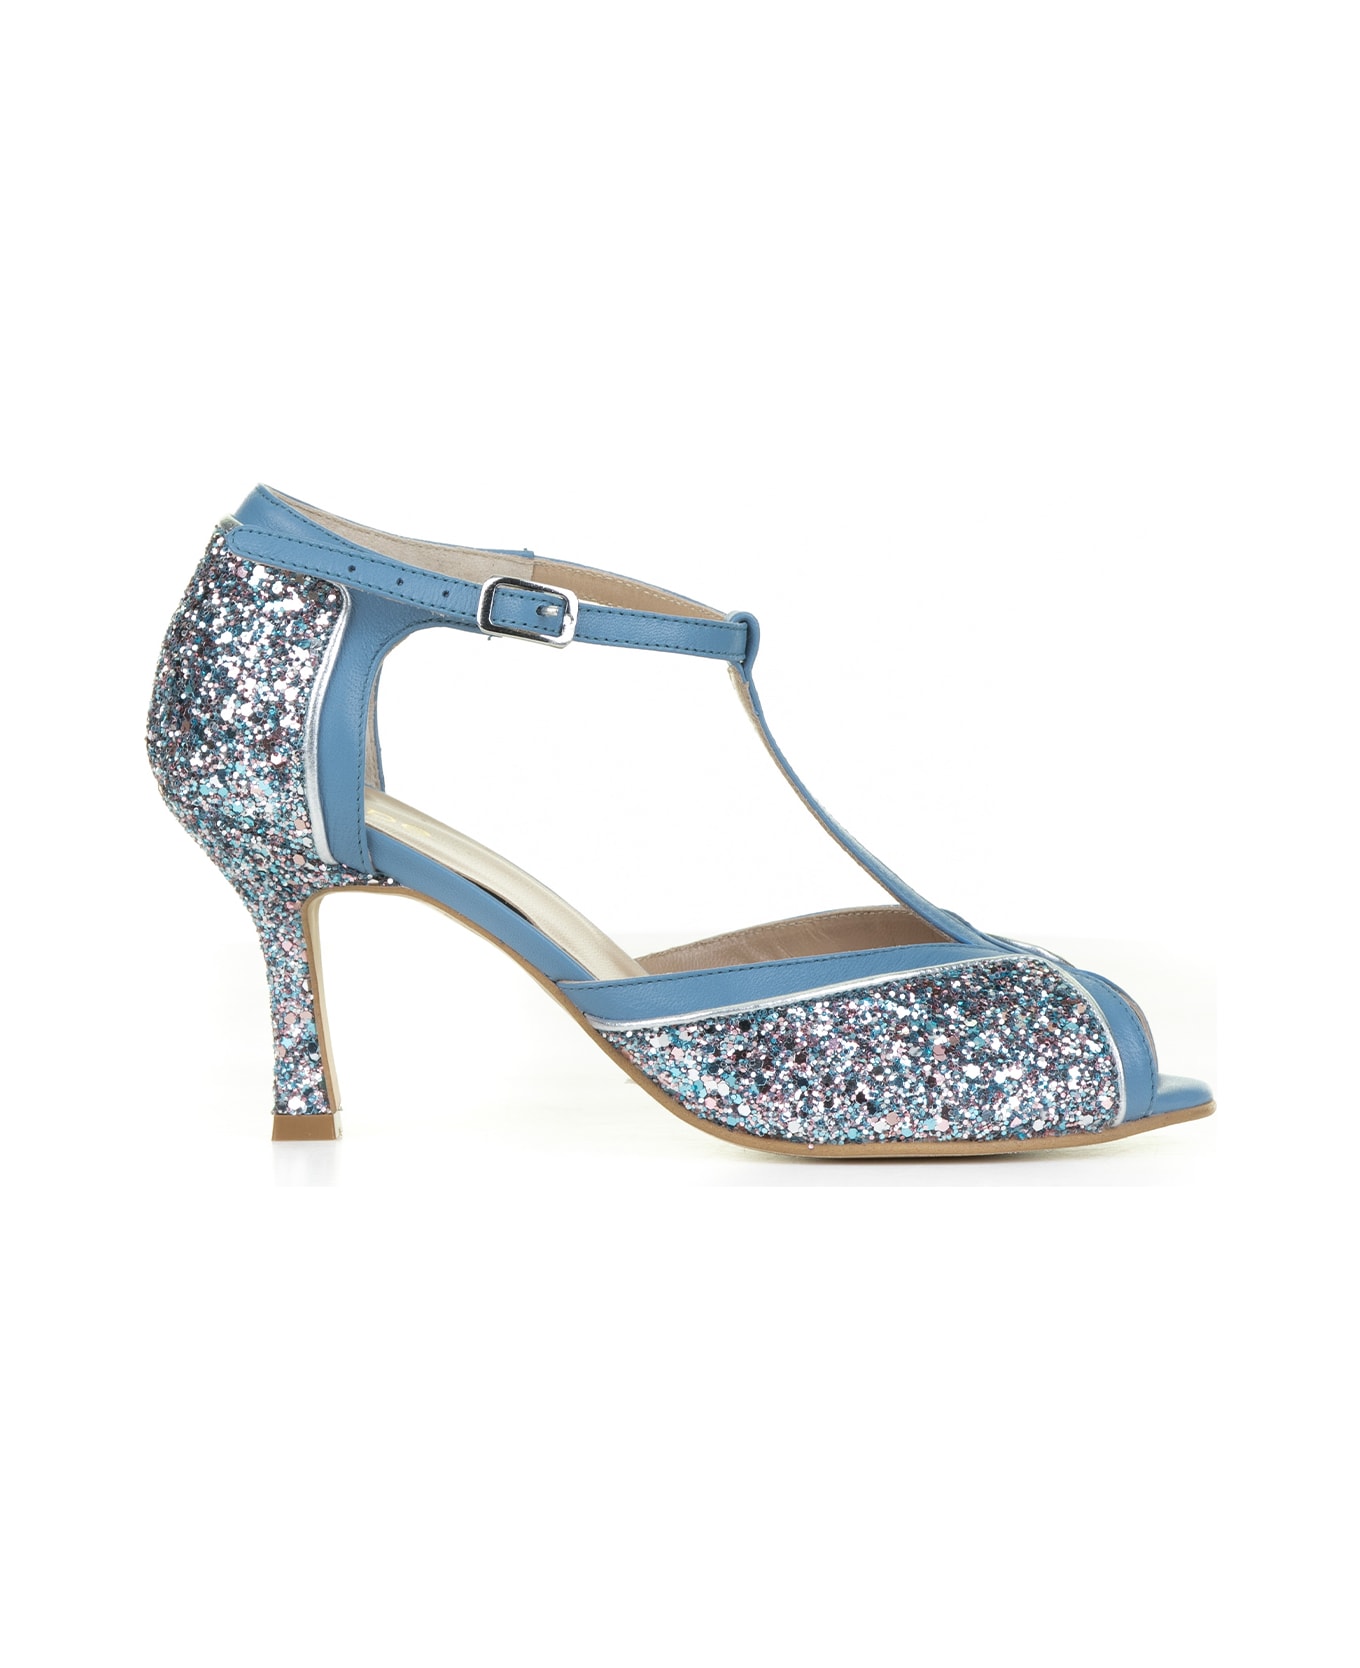 Hope Décolleté In Nappa Leather With Glitter And Strap - AZZURRO